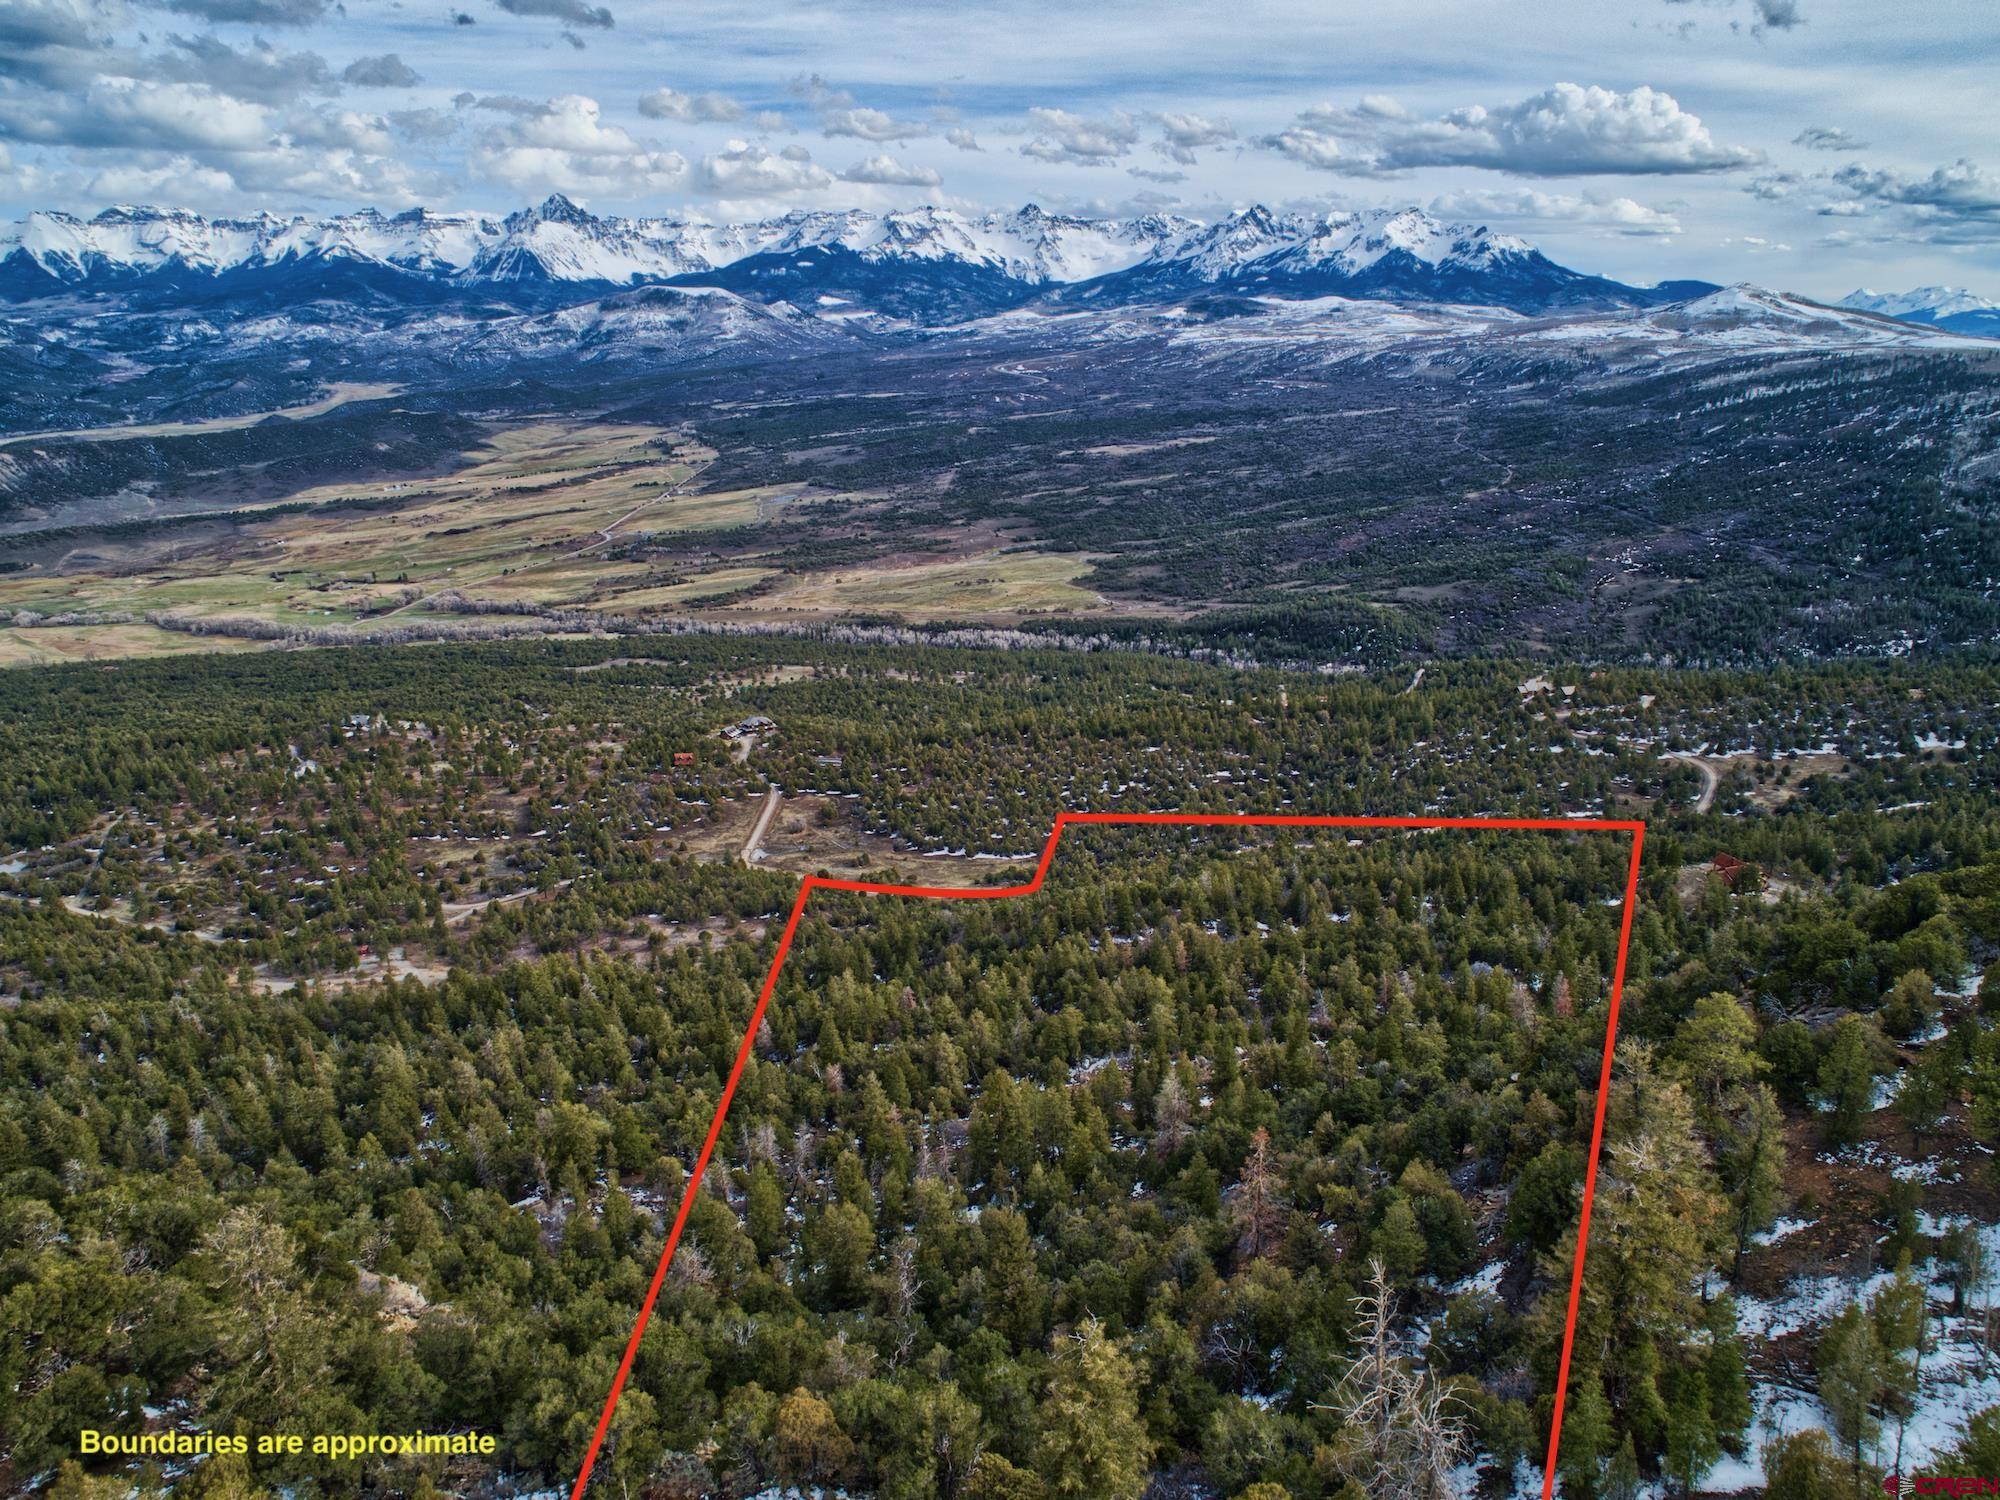 This 35 acre, beautifully contoured parcel is the premier view lot available on the market today! Located in the famous Pleasant Valley--on the way from Ridgway to Telluride, Lazy Dog Ranch has some of the Area's most glorious homes. Both full timers as well as second home owners love the sweeping views of both the Cimarron Range to the east as well as the Sneffels Range to the south. Ridgway is just a short distance away, and down the road you'll access hot springs at Orvis and Ouray. Telluride is just on the back side of Mount Sneffels and CR 24 hooks directly to Highway 62, which leads over the top of Dallas Divide. This lot is ideally situated, just as you reach Old Relay Road, and is located above as well as below the road. There are several building sites on the parcel, and one slightly above the road would be especially dramatic, so that you could use the area below Old Relay Road as a staging area for your construction. The lots in Lazy Dog are easy to build, with good soils for foundations and septic systems. Excellent access to the best area utilities, including San Miguel Power, and Tri County Water. There is excellent maintenance through the HOA of the road for year round access. Come see this extremely high quality property today, and start planning your dream home!